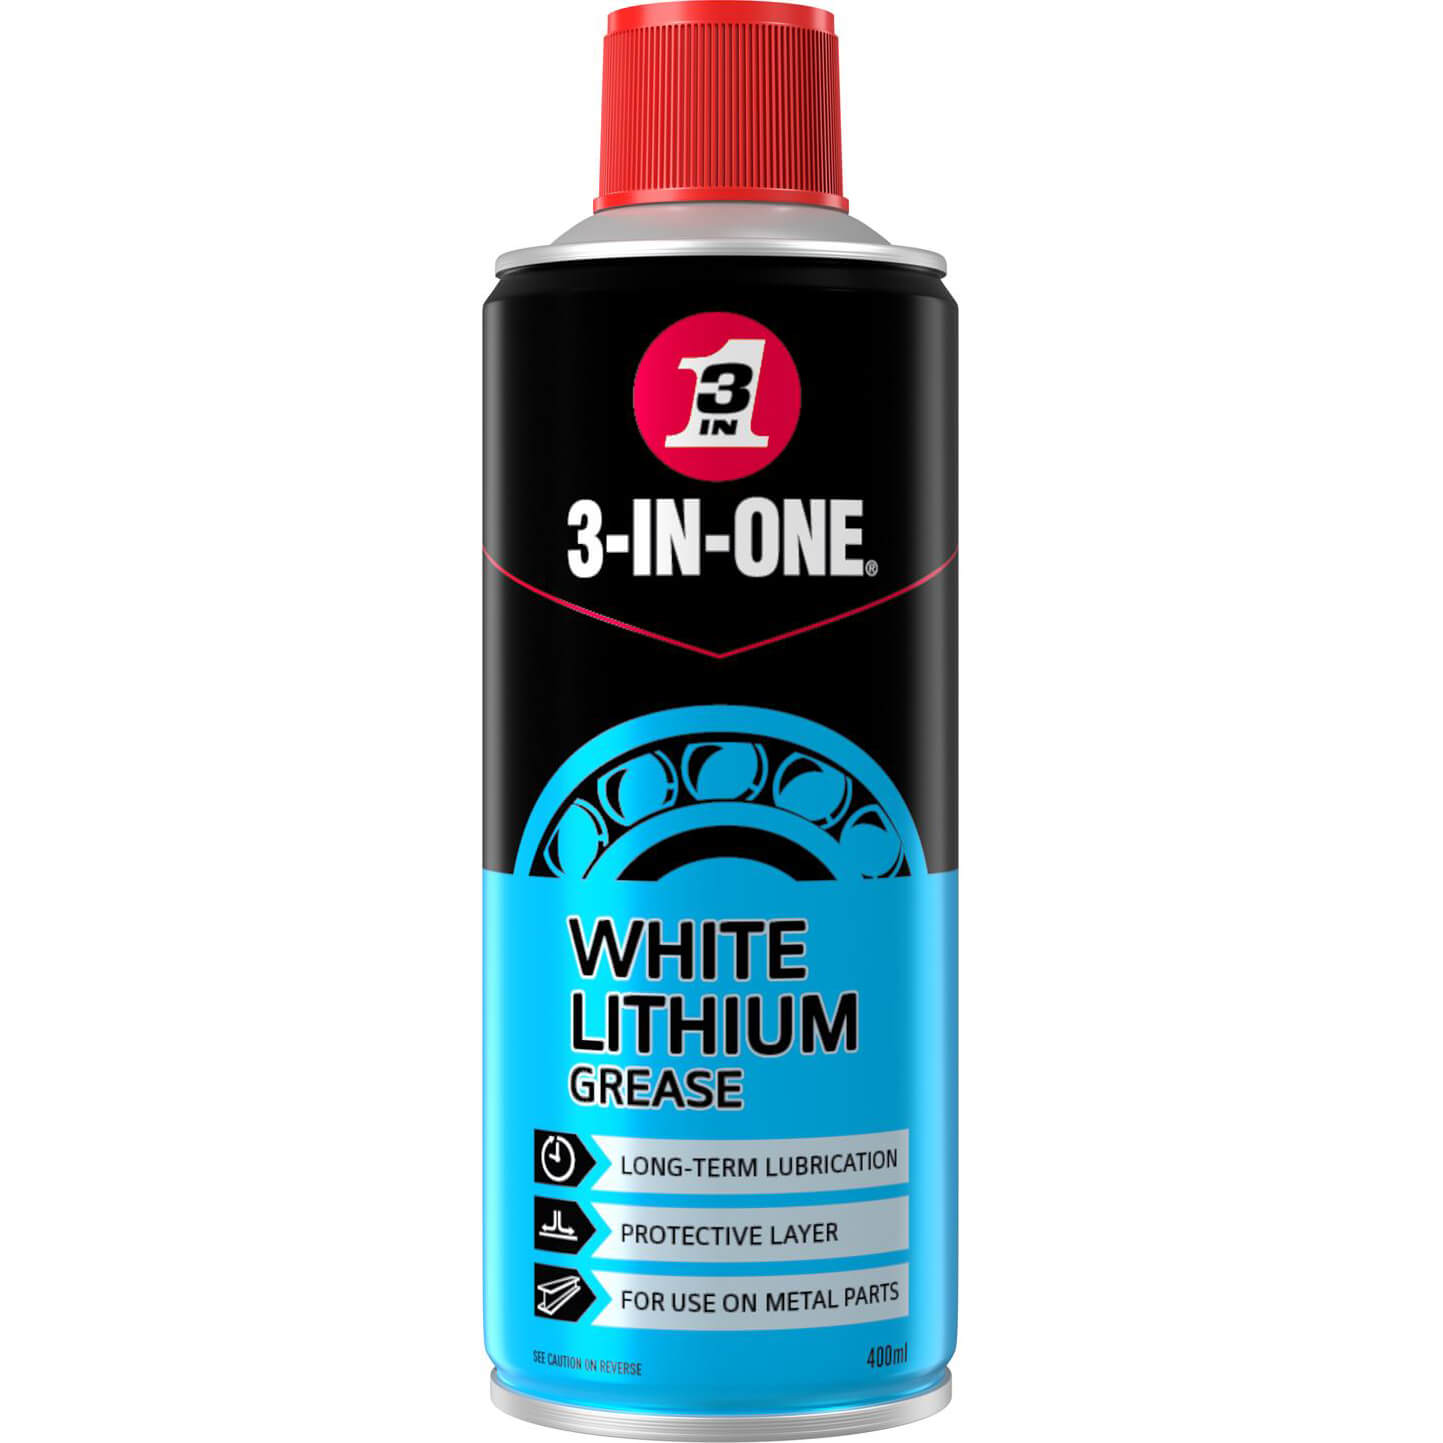 Photos - Car Service Station Equipment 3 In 1 Professional White Lithium Grease 400ml